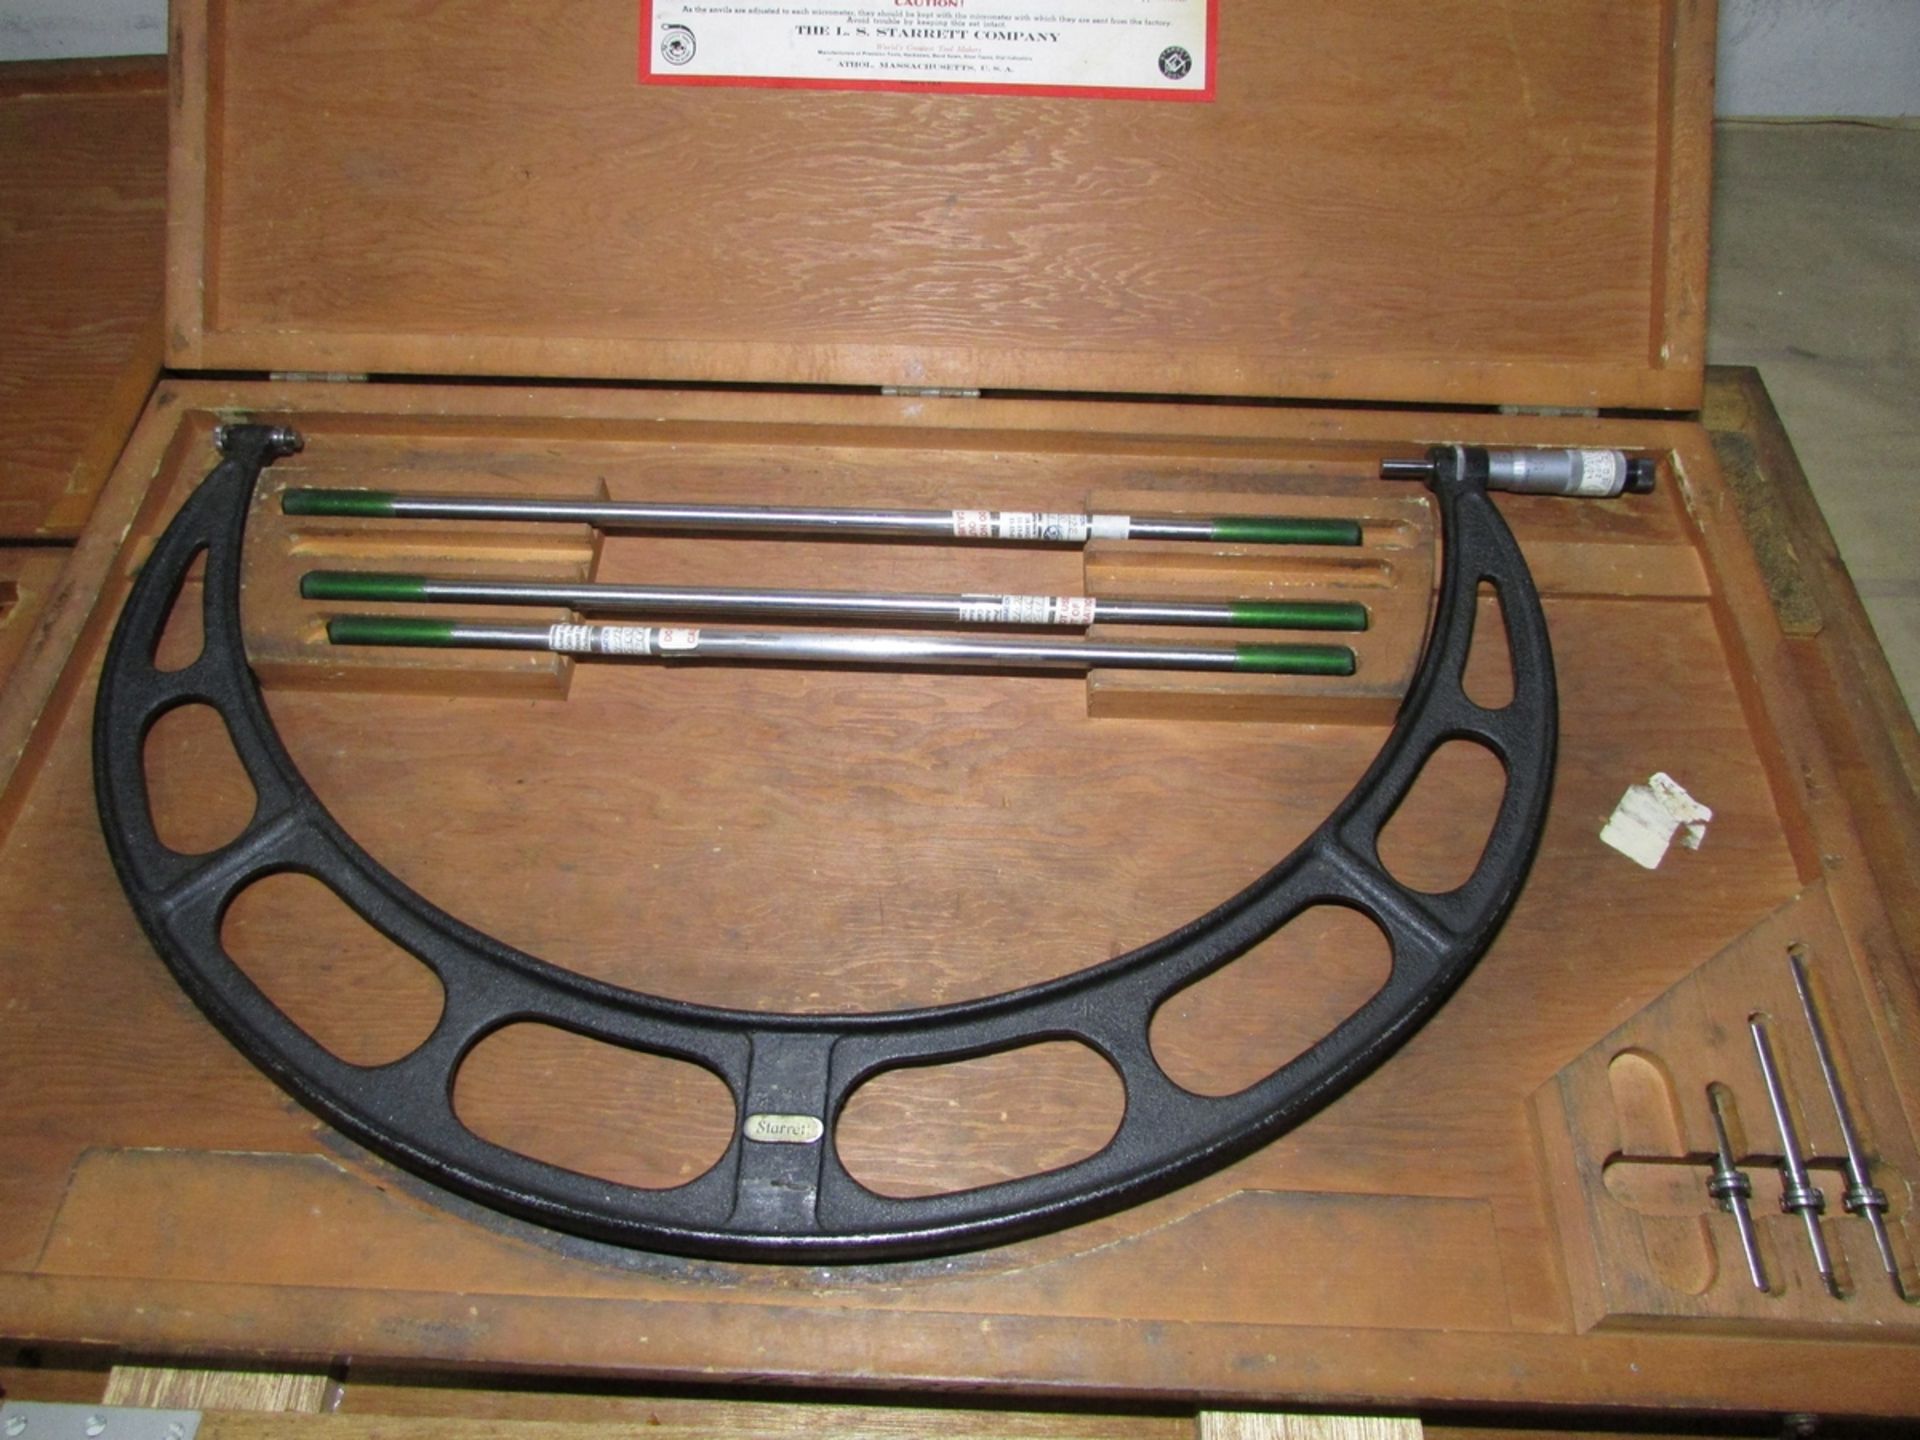 LOT - (4) OD MICROMETERS: (1) 6"-12", (1) 12"-16", (1) 16"-20", (1) 20"-24" - Image 4 of 5